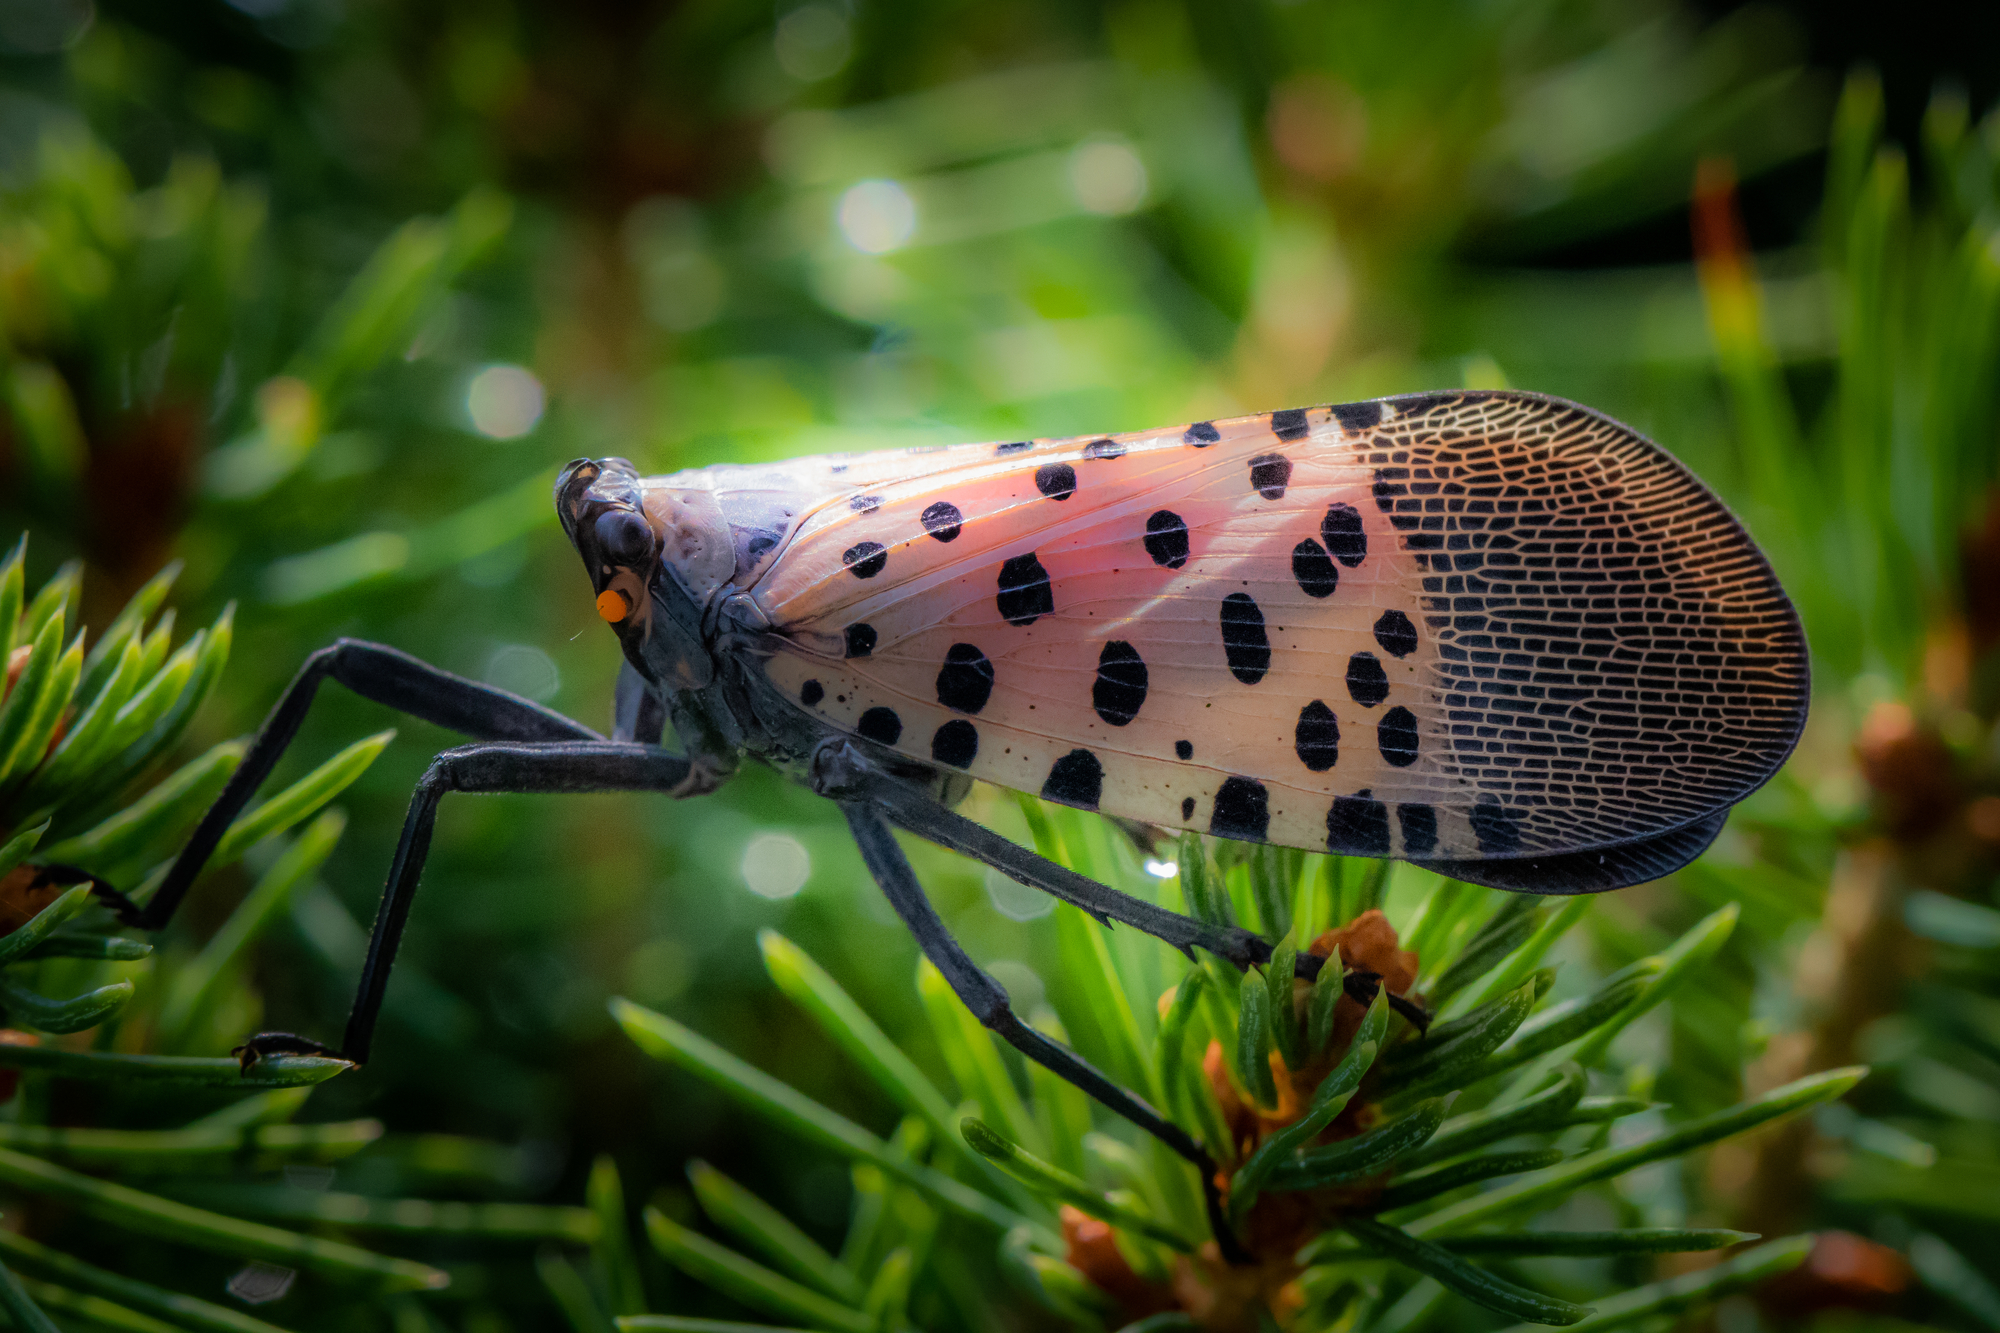 Spotted Lanternfly: Operating Without a Permit Could Cost You $20,000